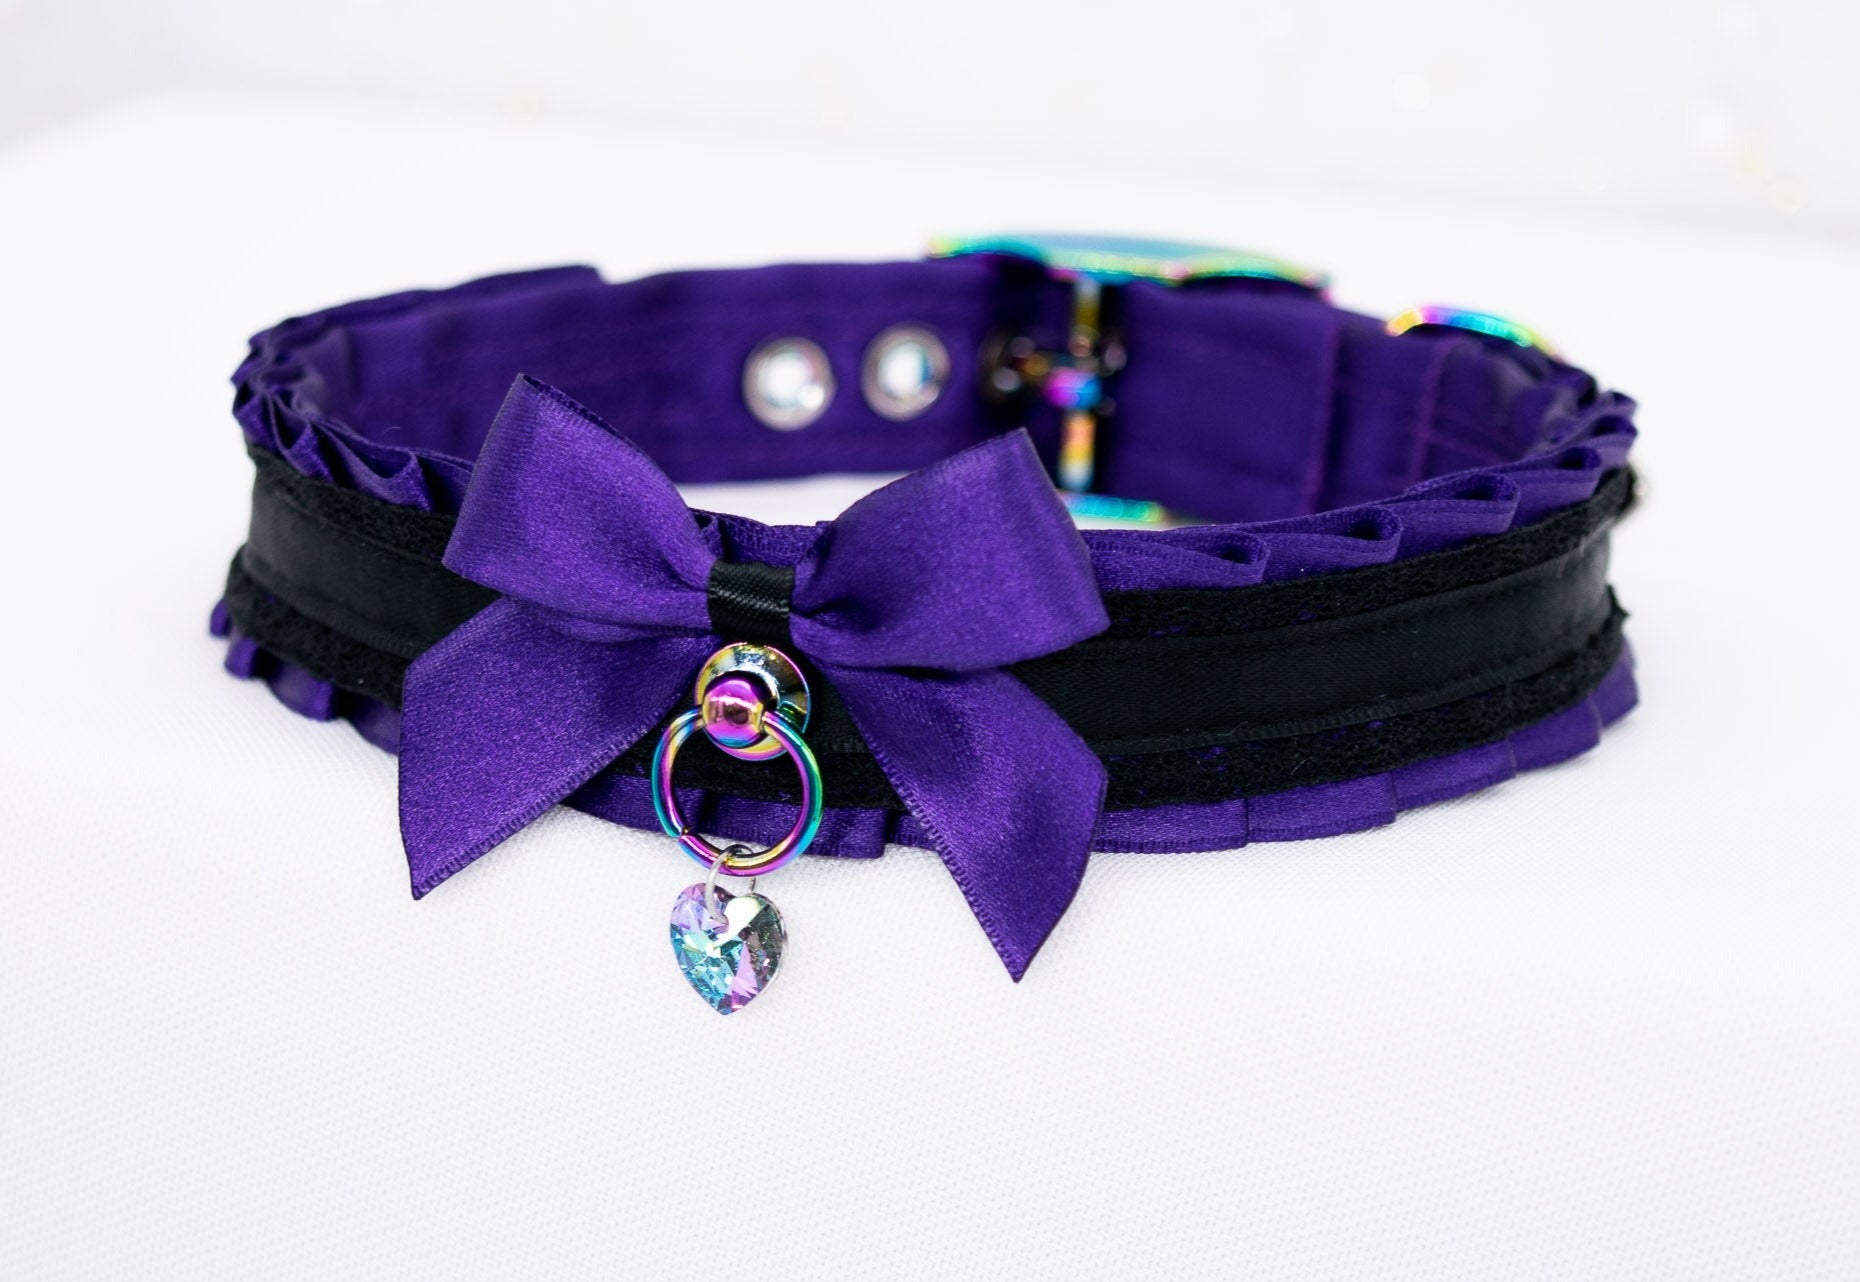 Regal Purple and Black Lace BDSM Collar in Rainbow